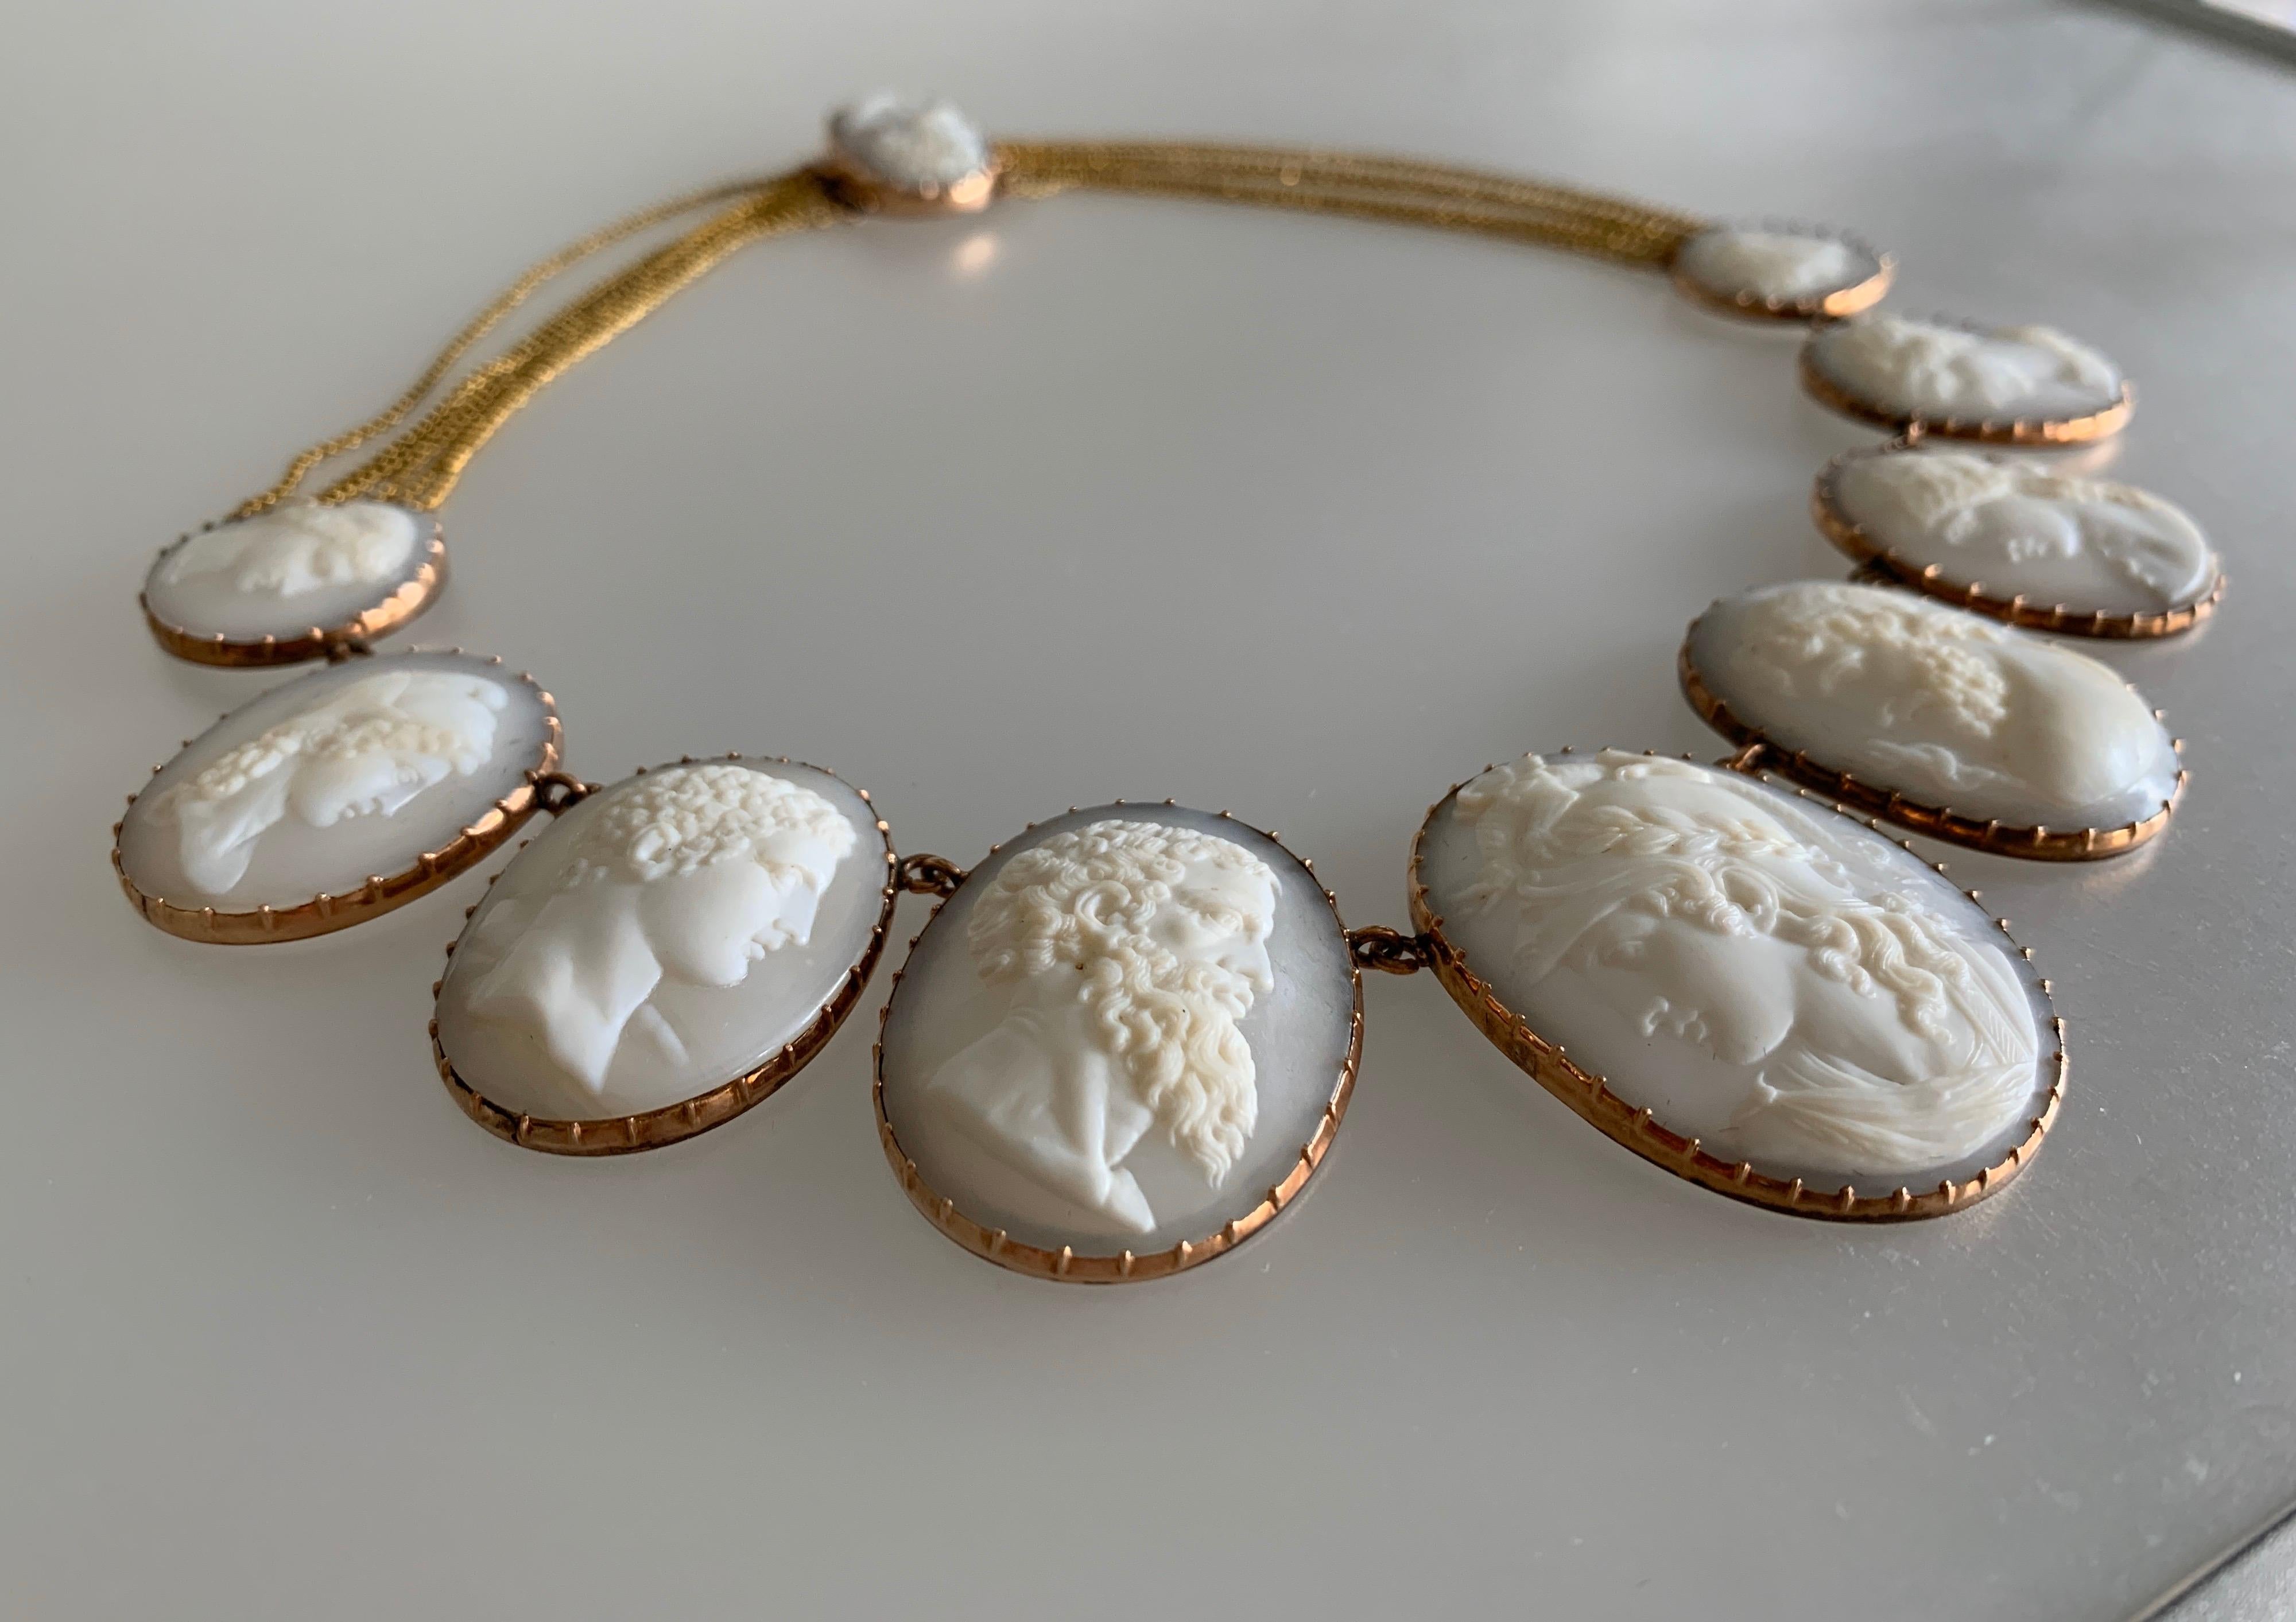 Gemolithos, victorian Agate Cameo necklace, 14K gold, weight: 63gr, circa 1860s.
Length: 440mm, measurements of the biggest Came: 42x32mm and smallest 27x18mm.

